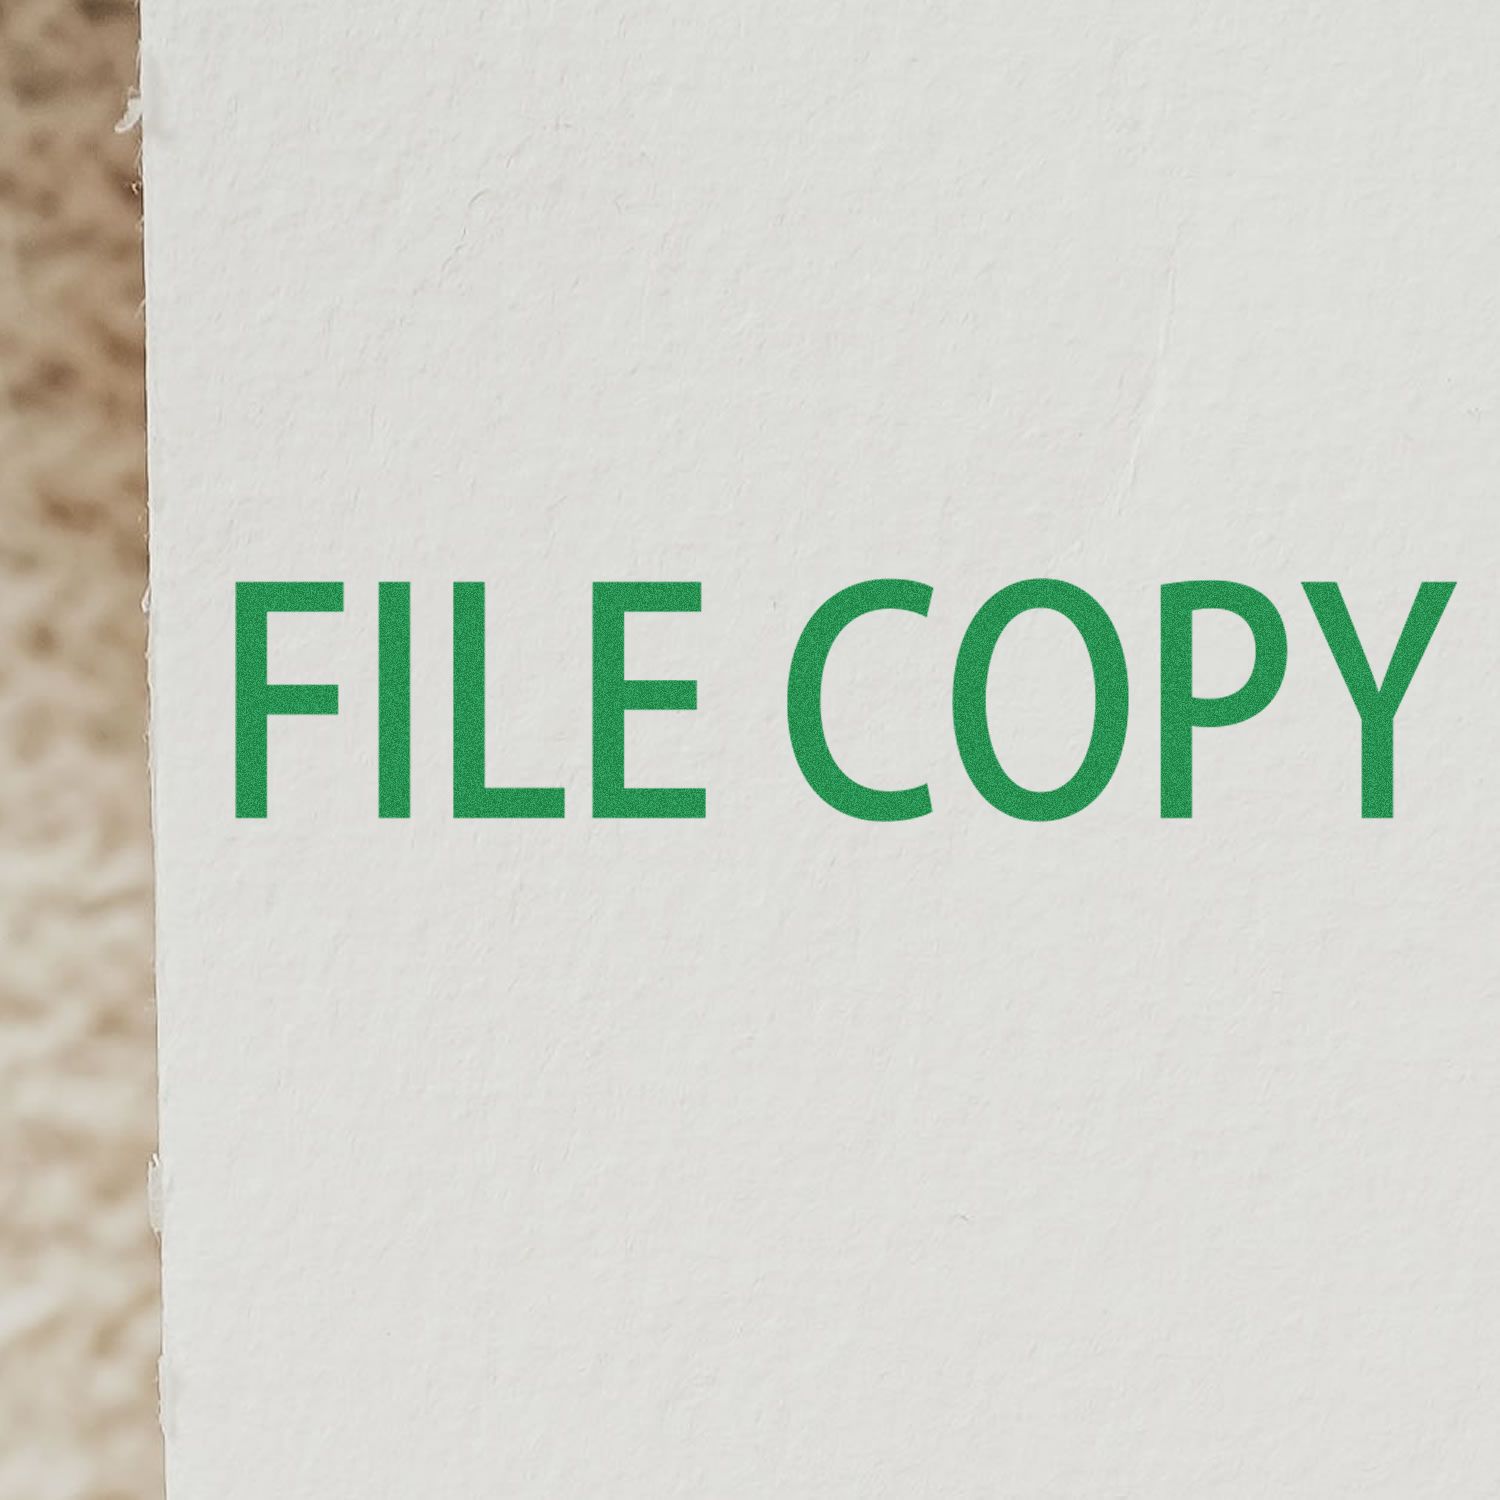 Large Pre-Inked File Copy Stamp In Use